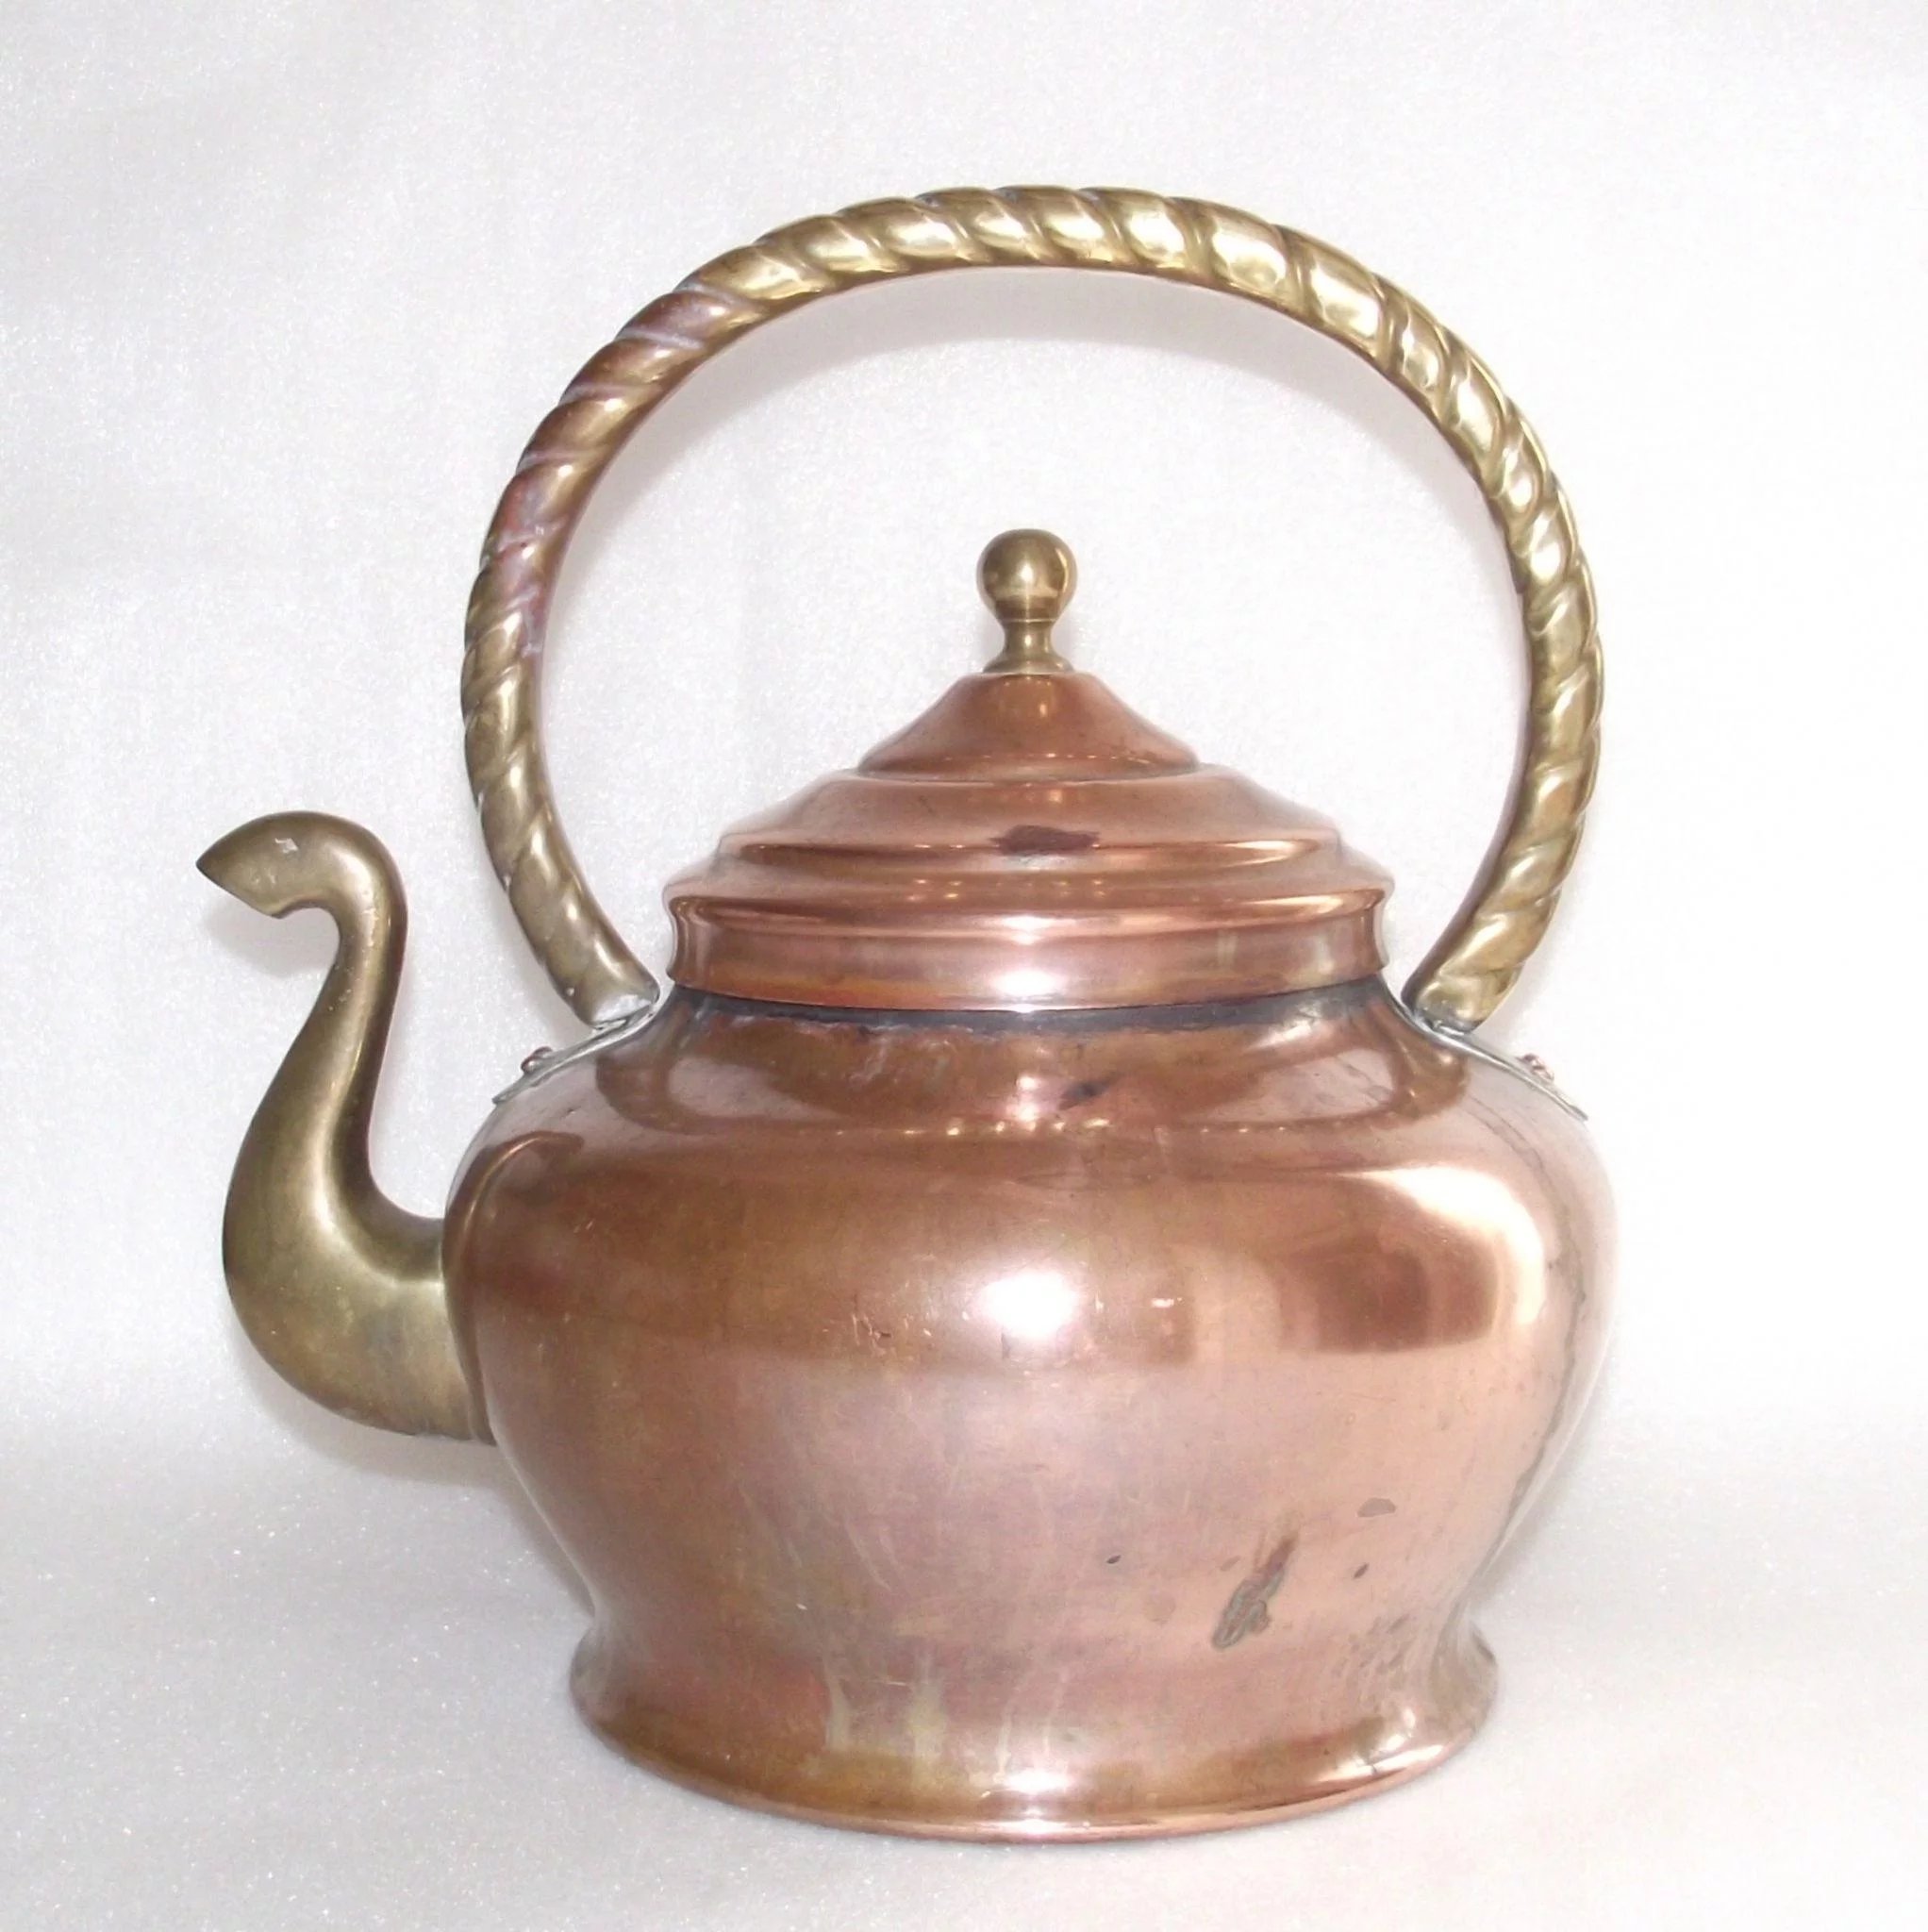 Vintage Italian Copper Tea Kettle with Brass Handle and Swan Neck ...